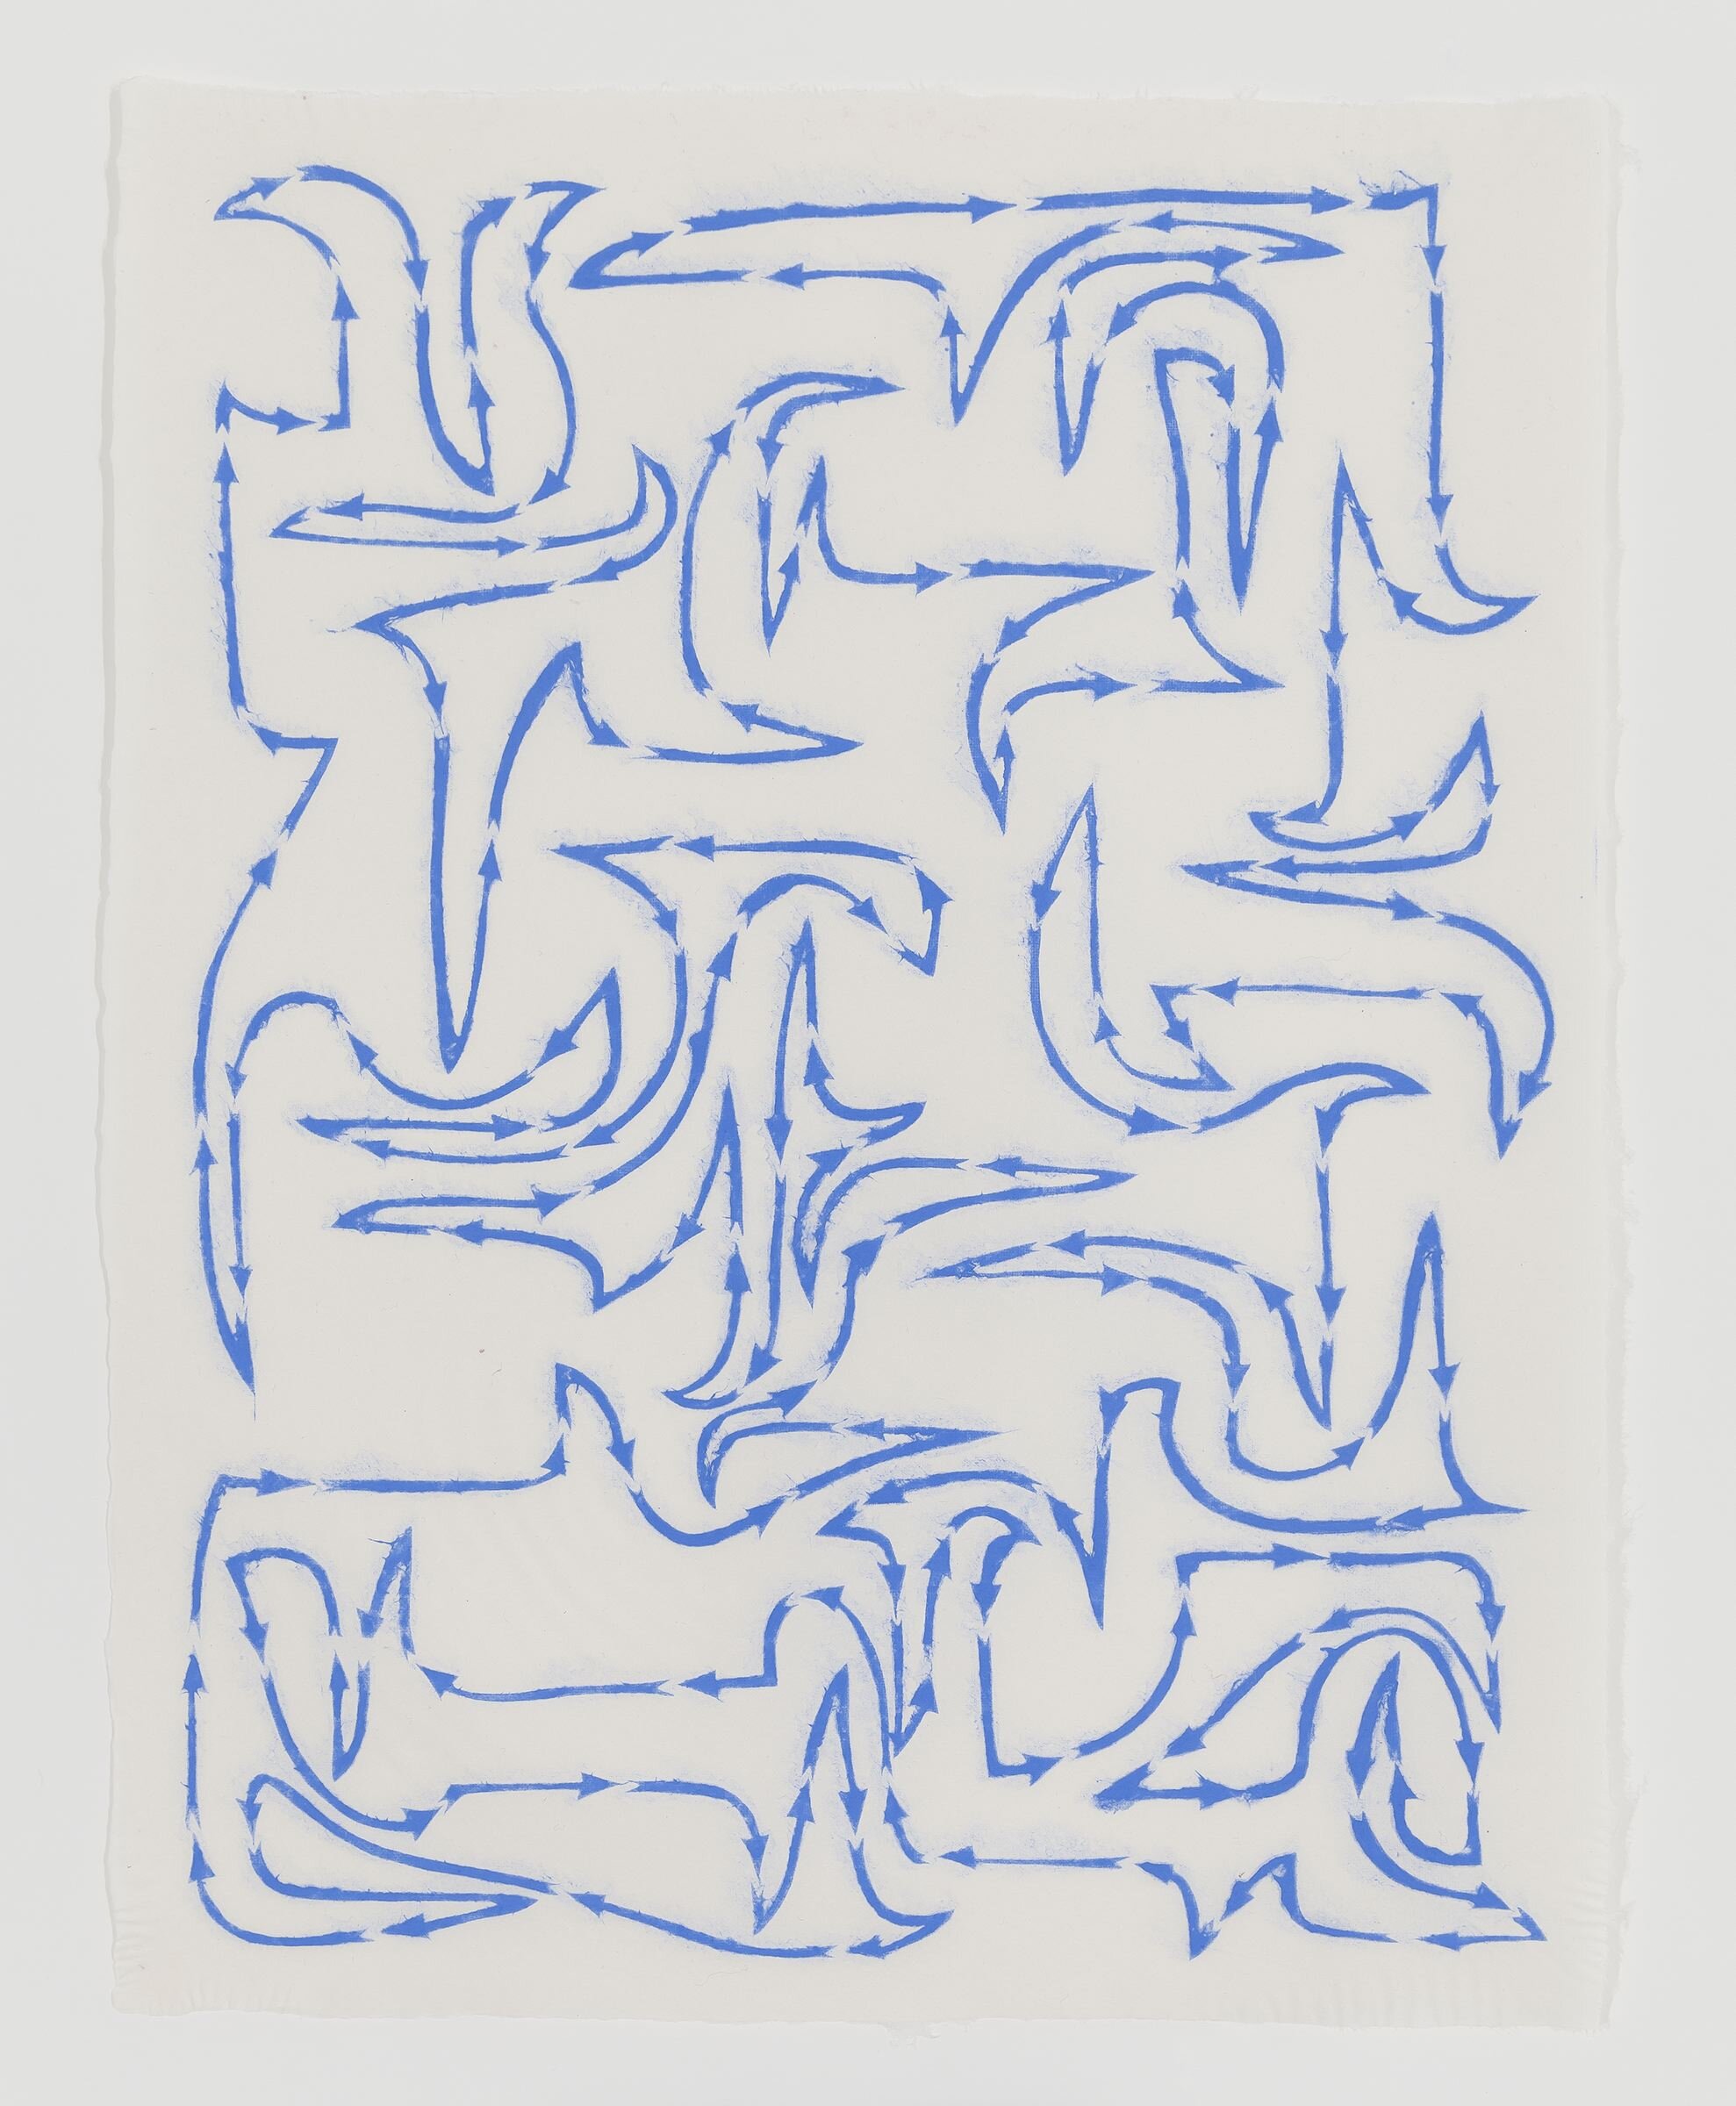  James Siena,  Disconnected Hooks (Blue),  2014, Pigmented linen pulp on abaca base sheet, 17.25 x 13.5 inches.  